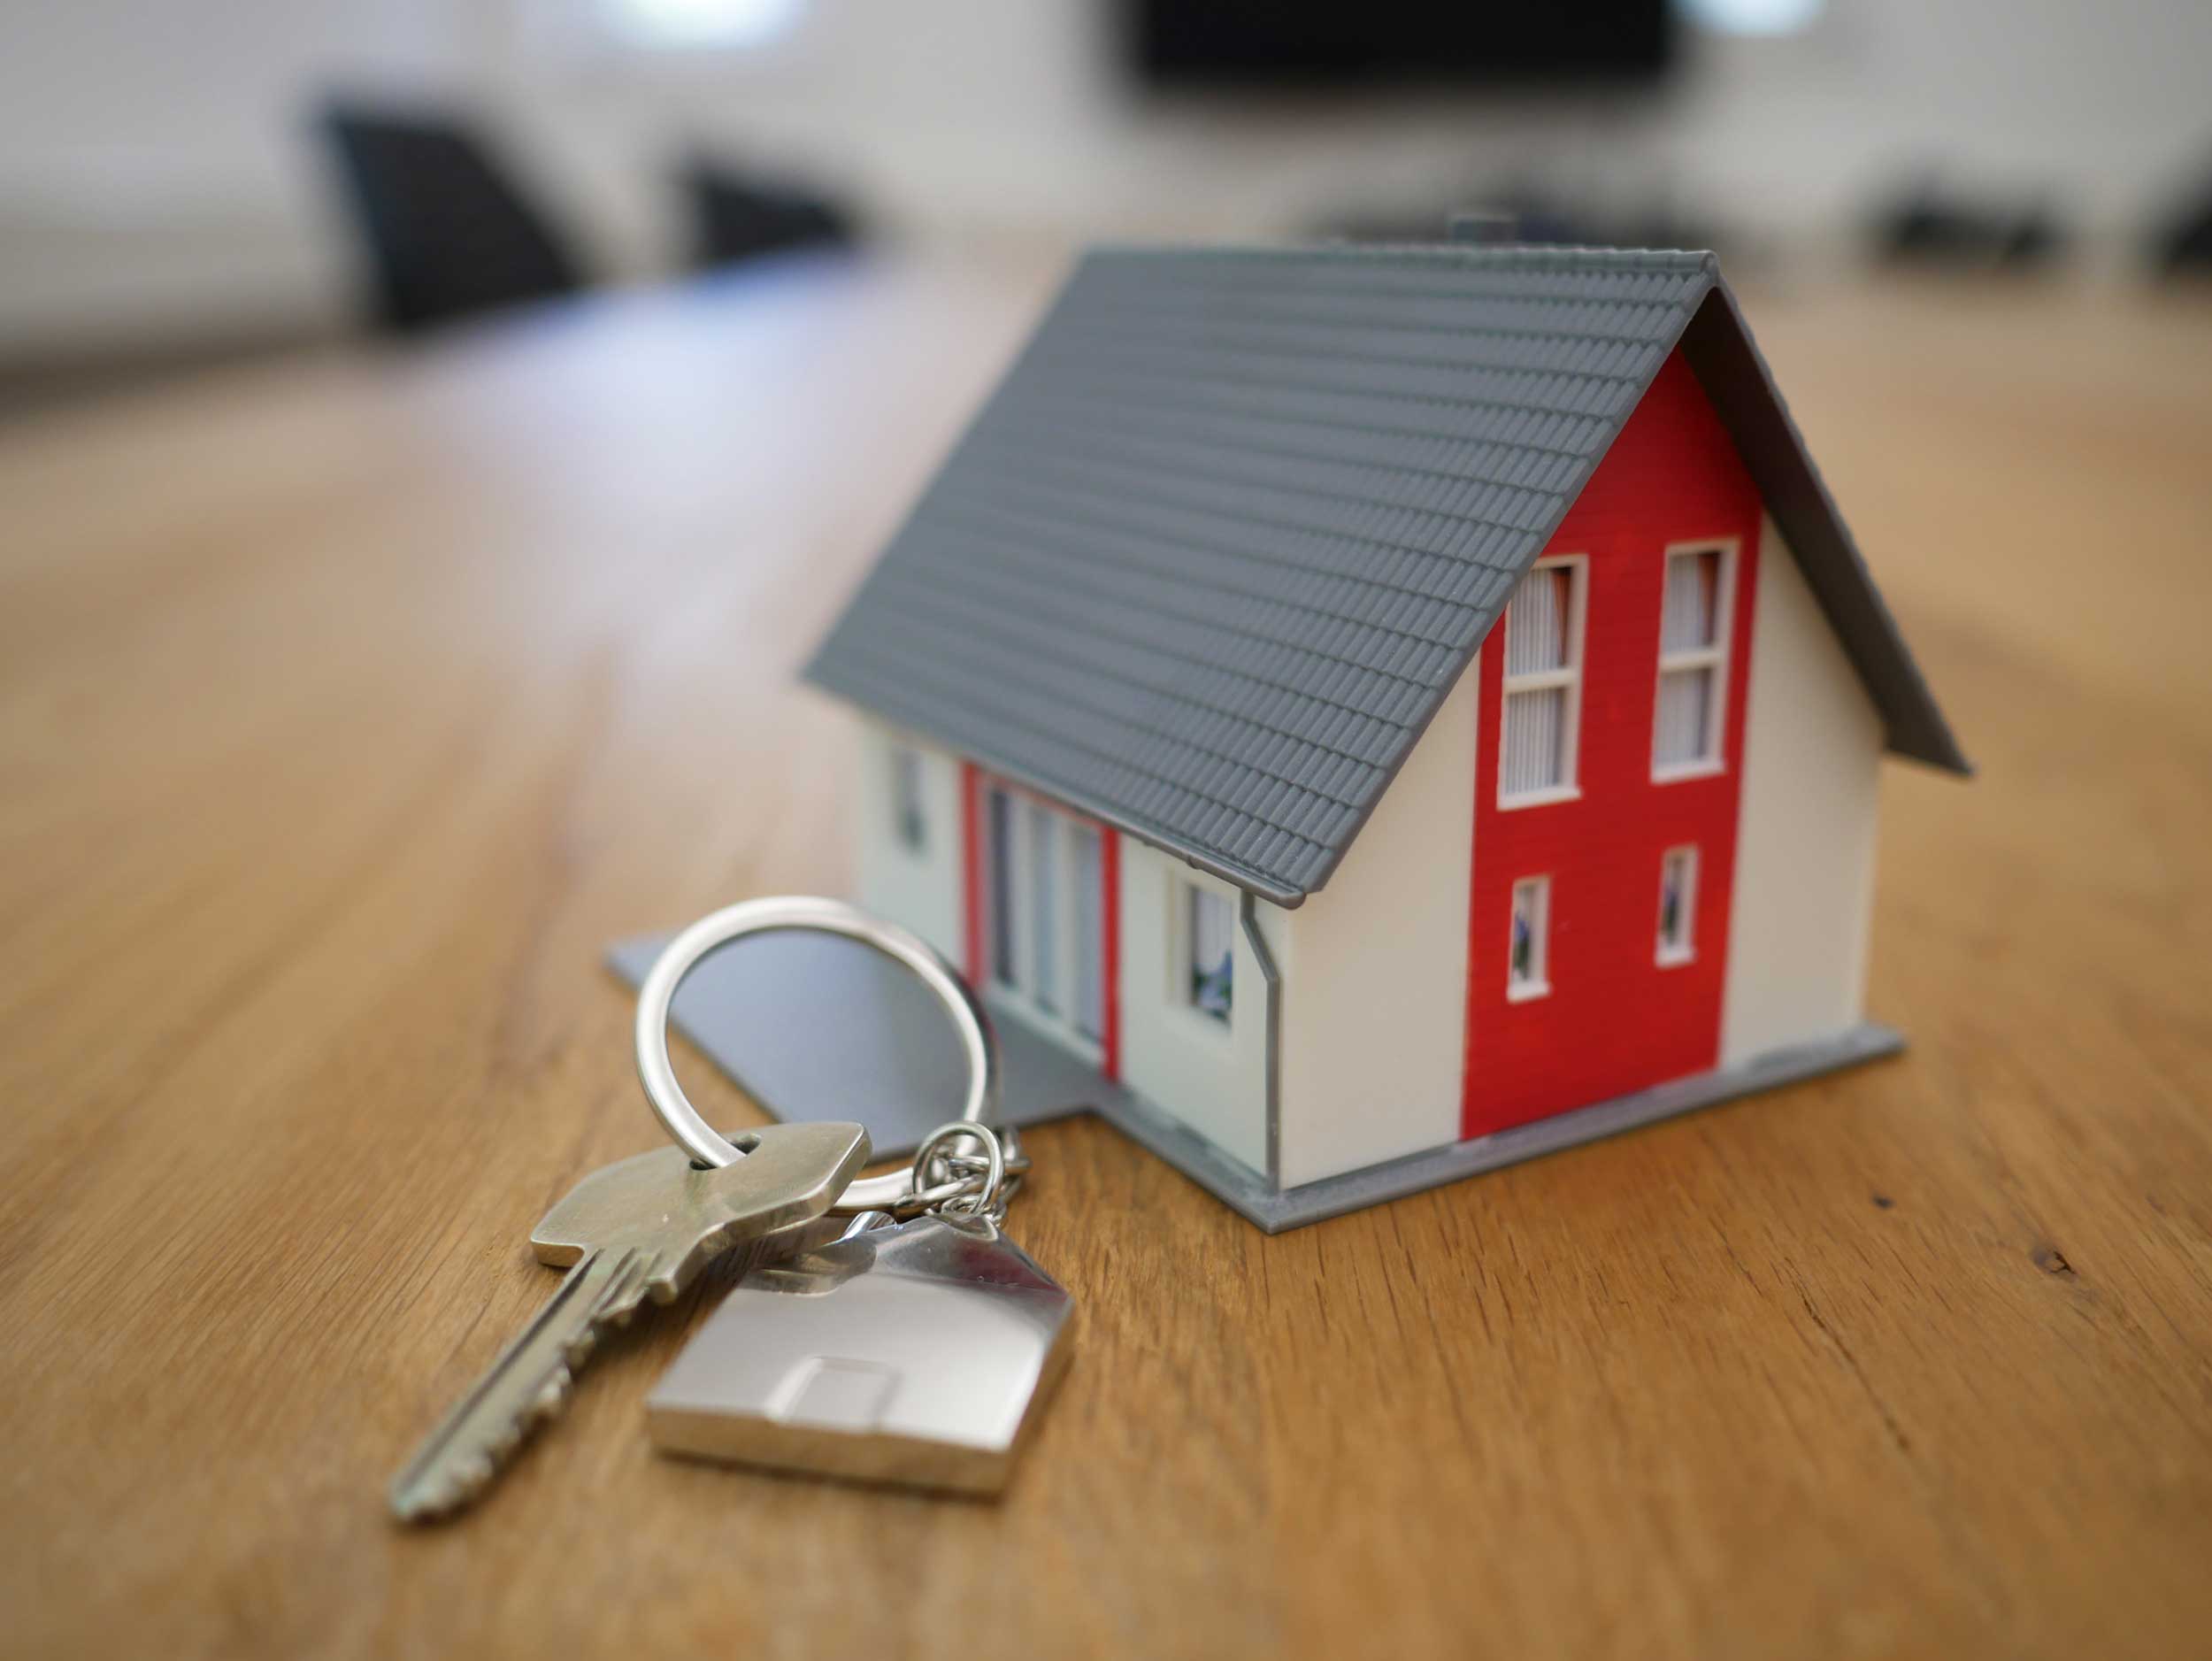 Model home resting on a table with a set of keys laying beside the home depicting Mortgage Protection Insurance importance.